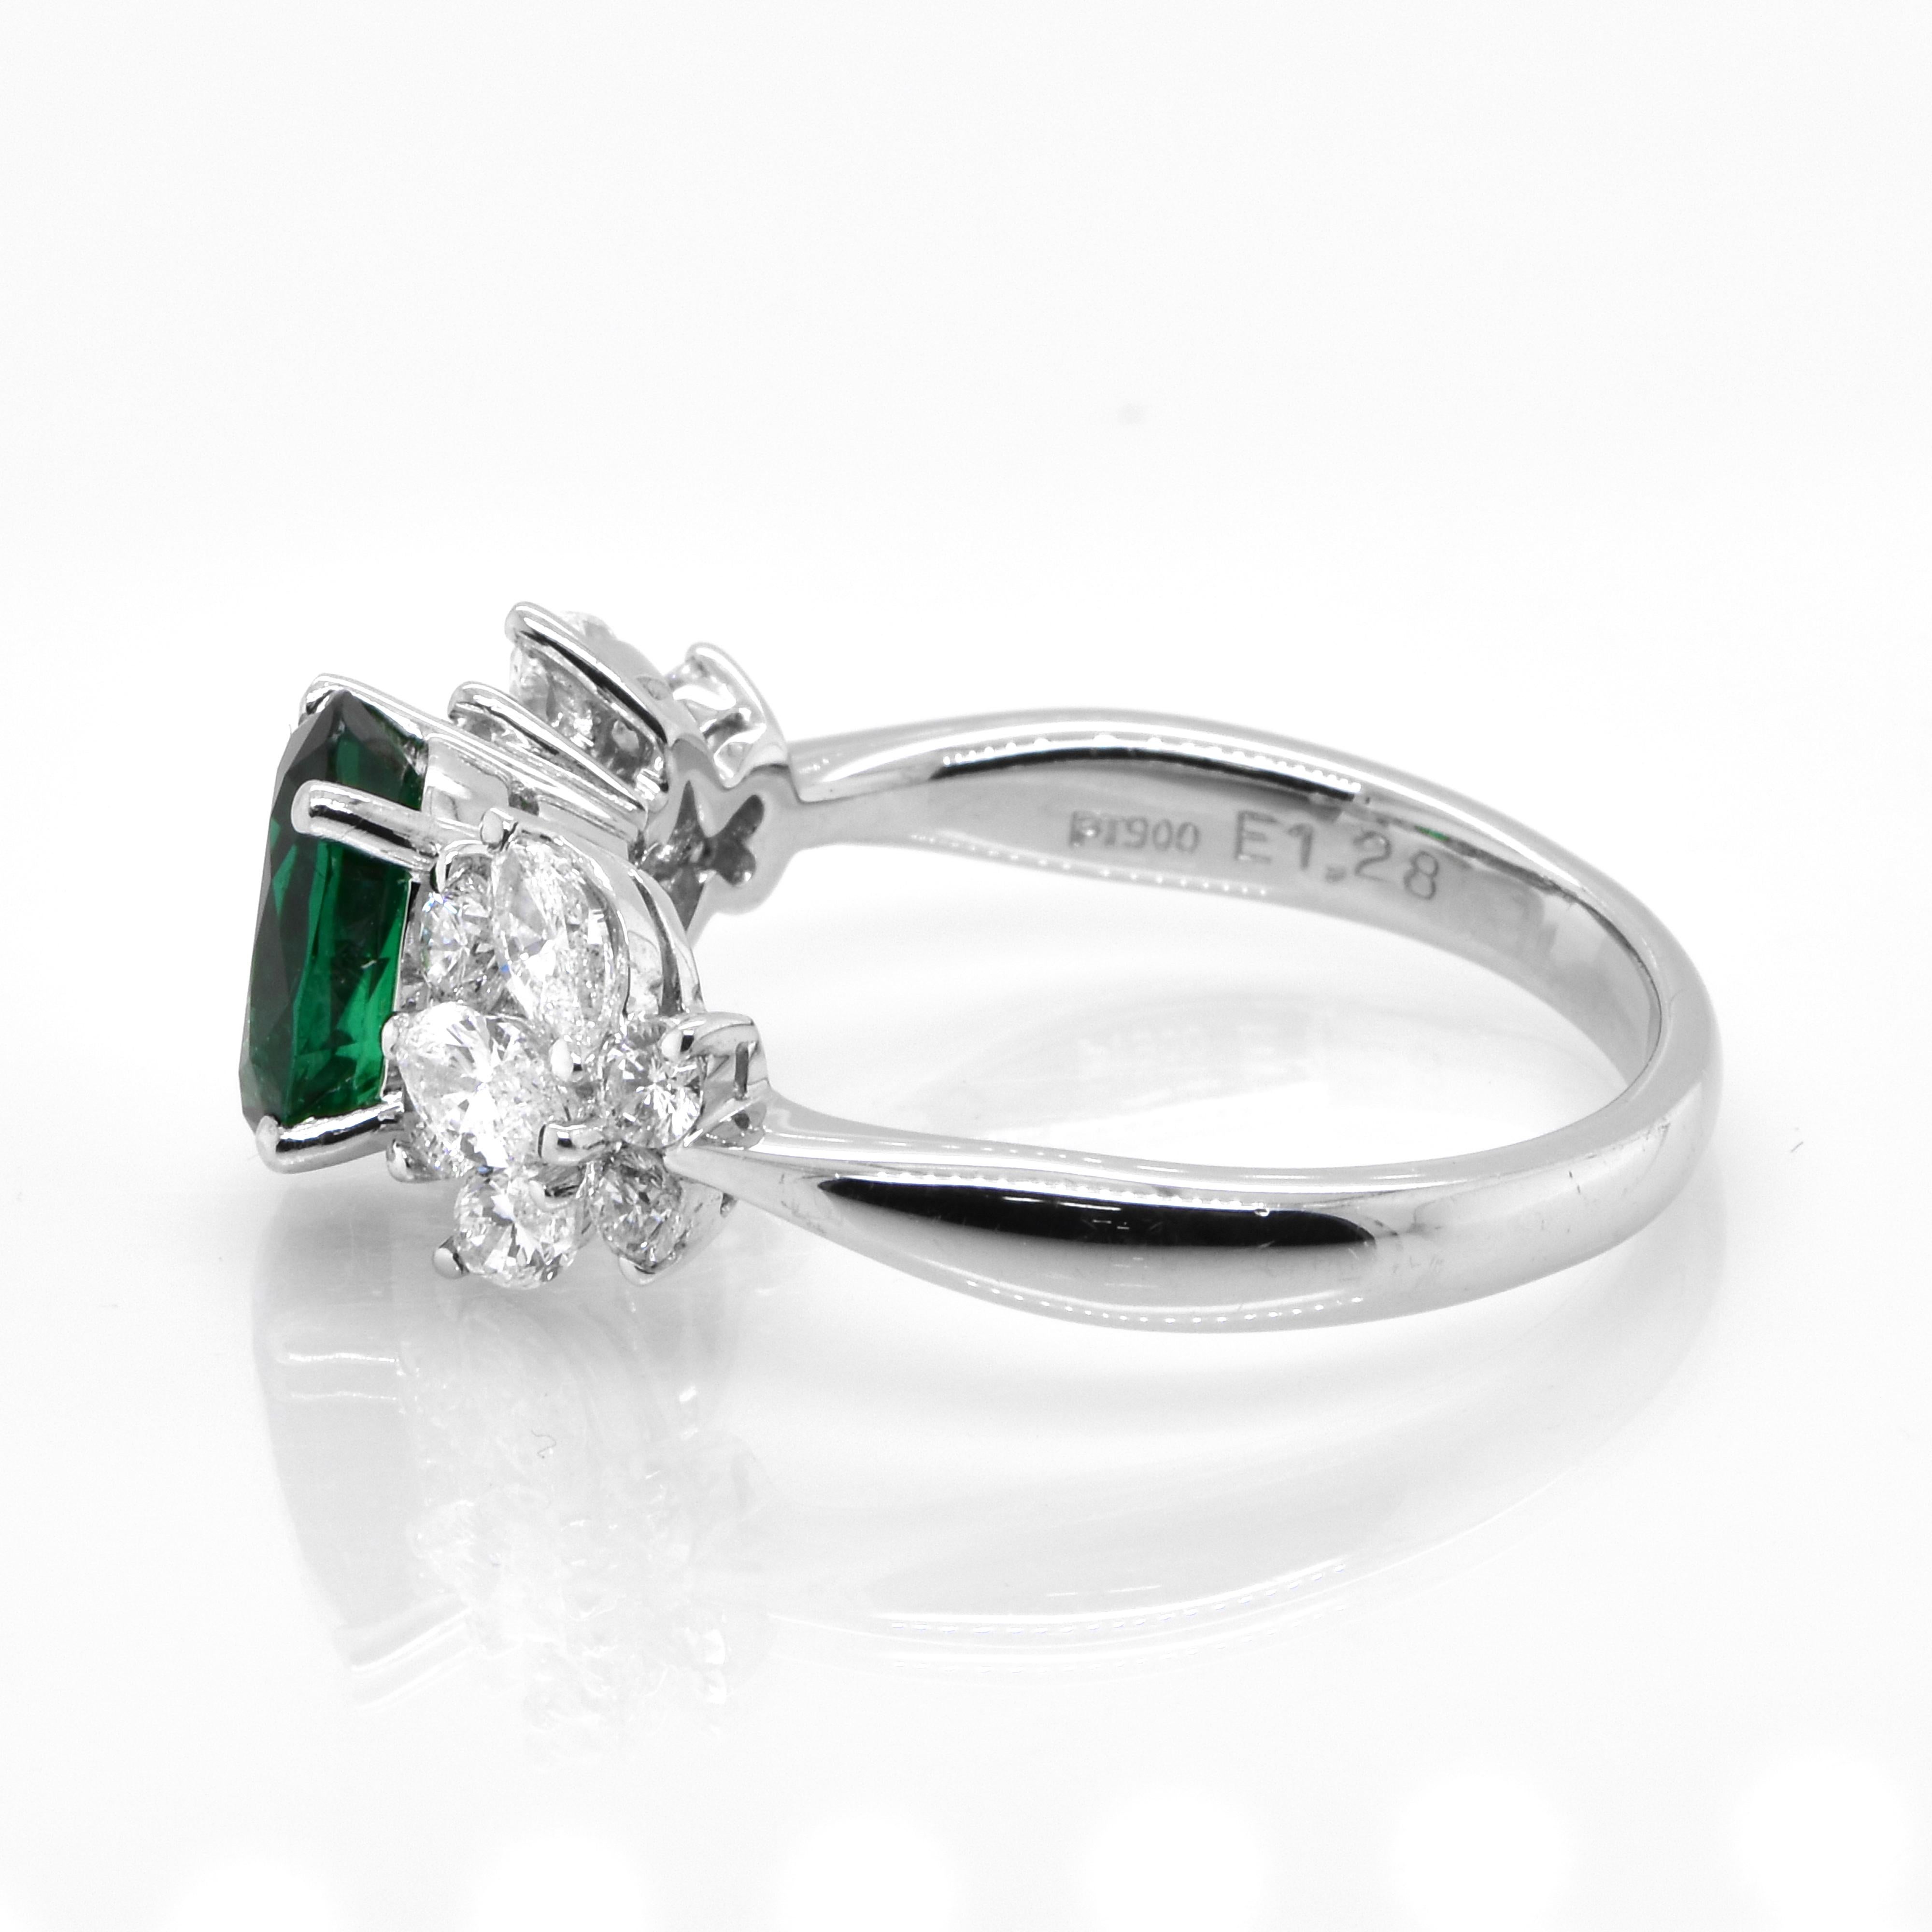 Oval Cut 1.28 Carat Natural Vivid Green Emerald and Diamond Ring Made in Platinum For Sale